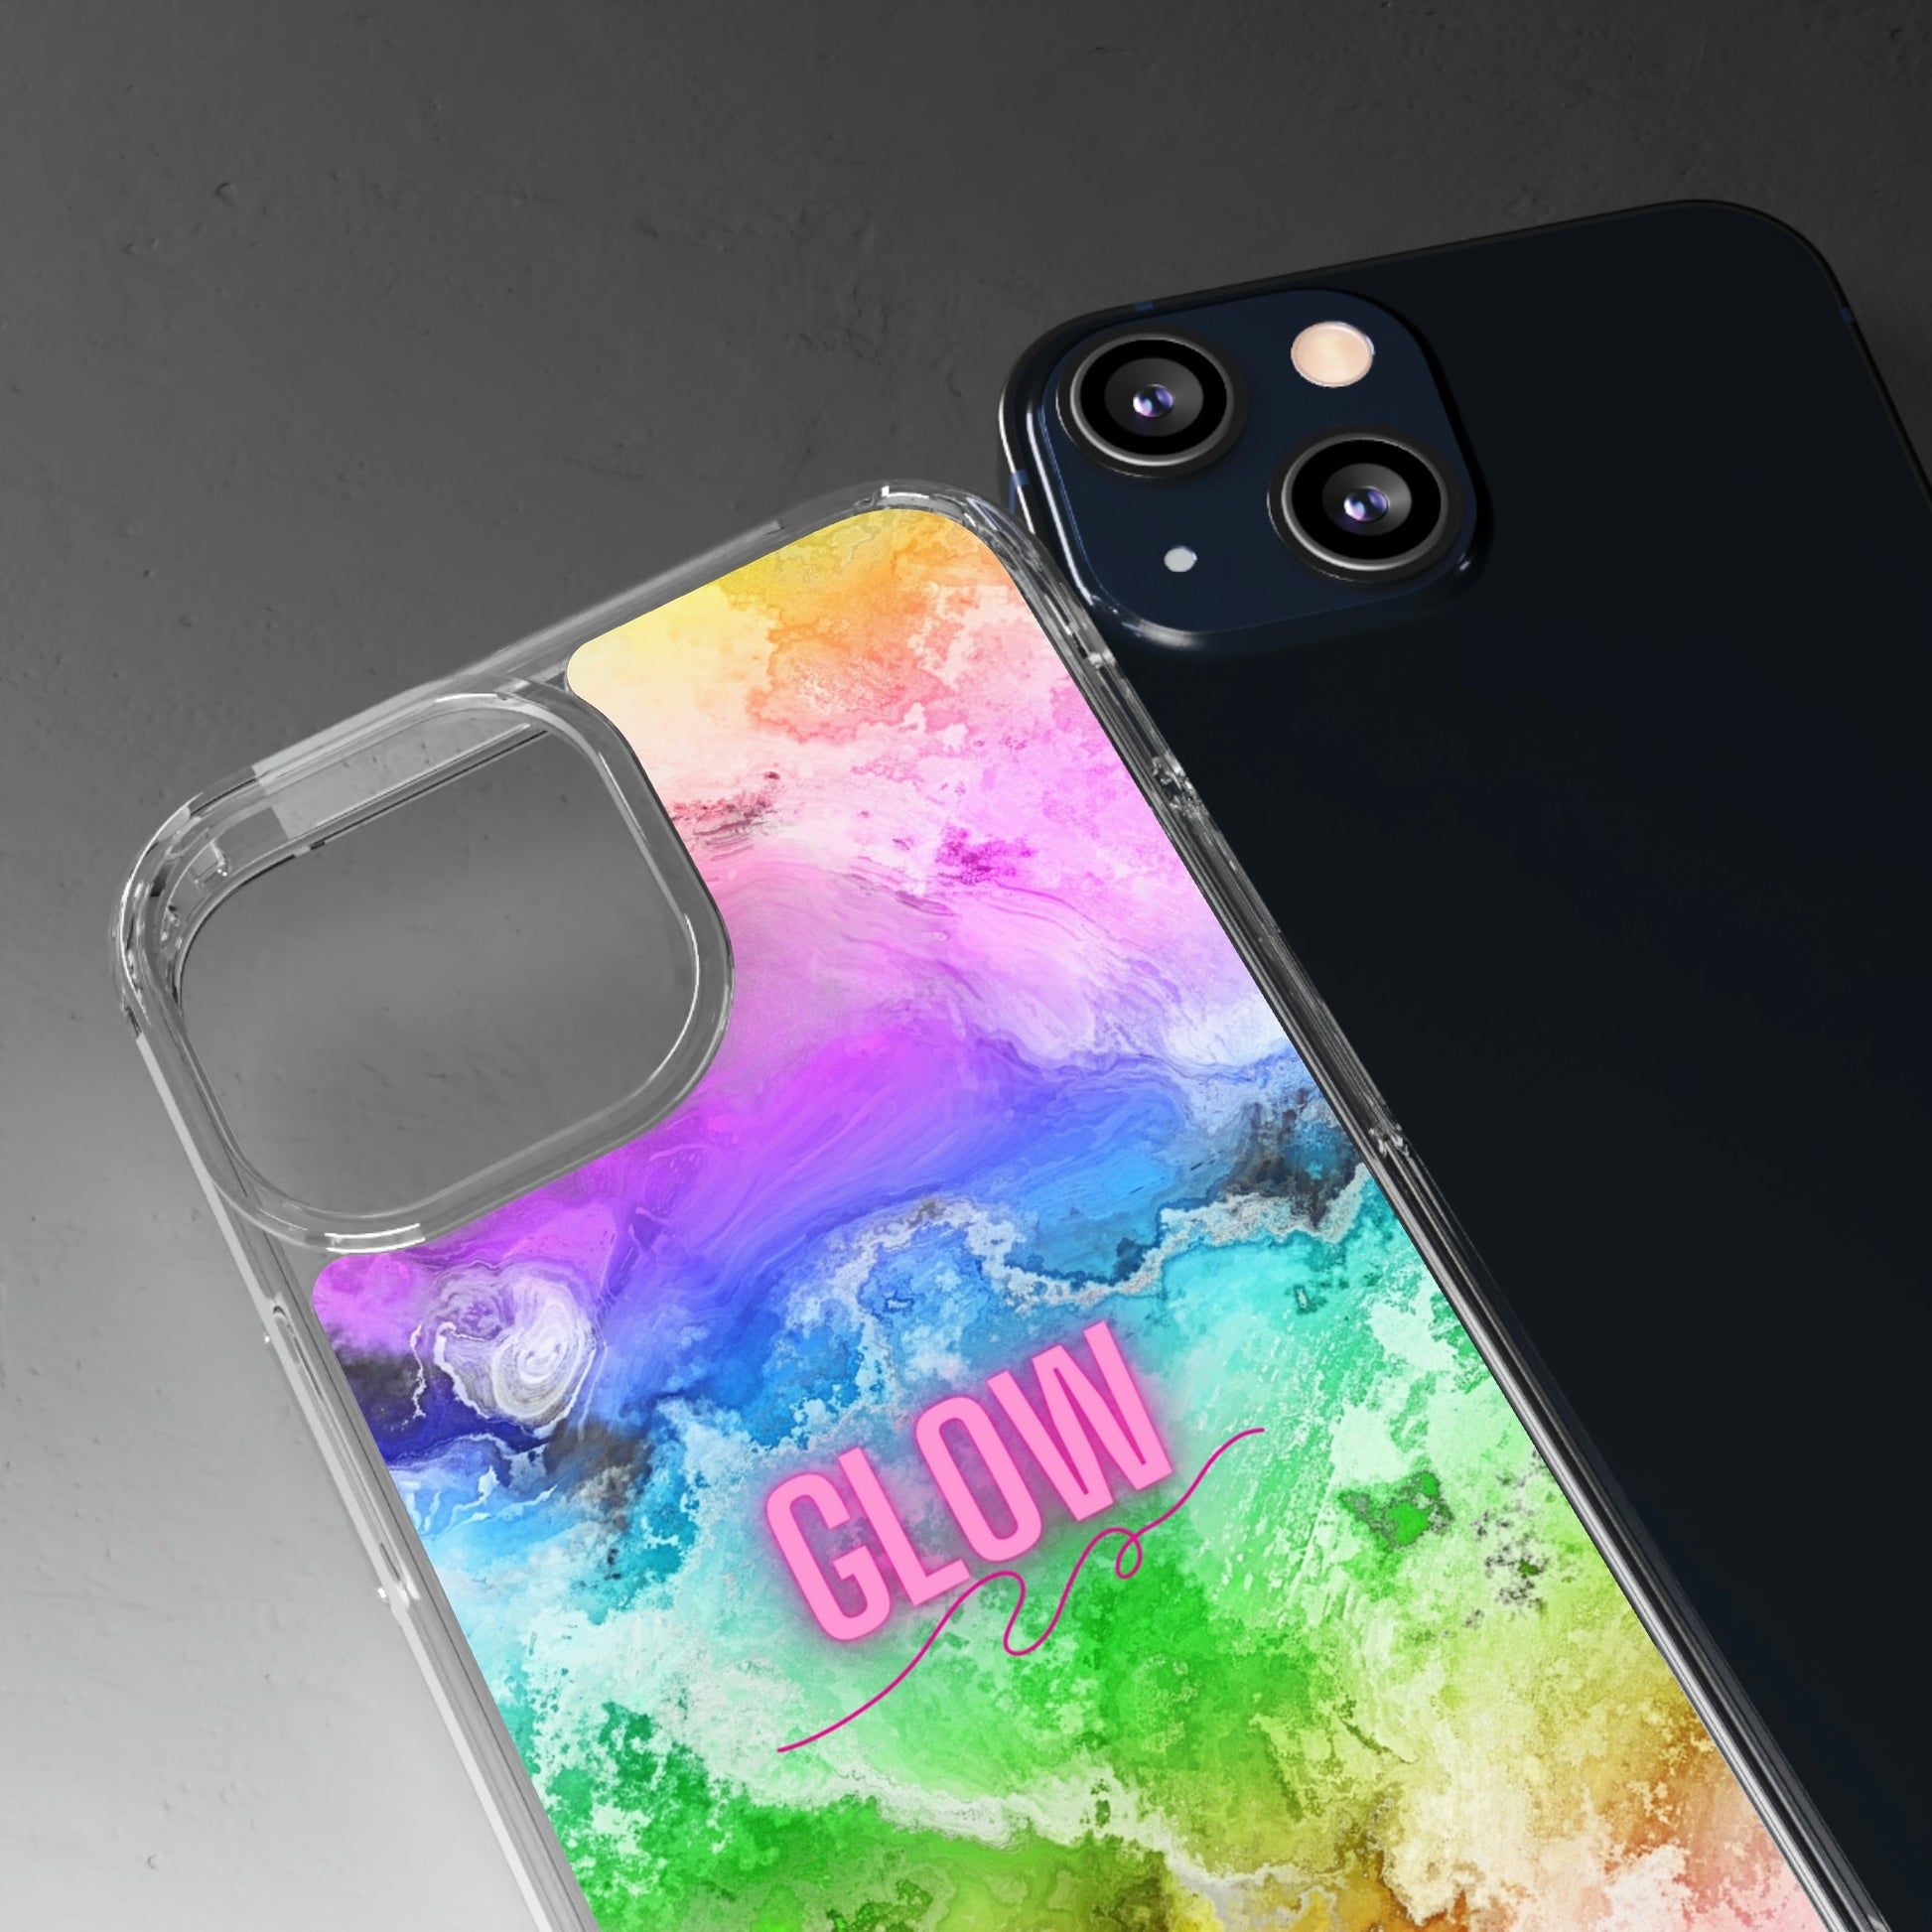 Glow Colorful LMBTQ Clear Case - Classy Cases